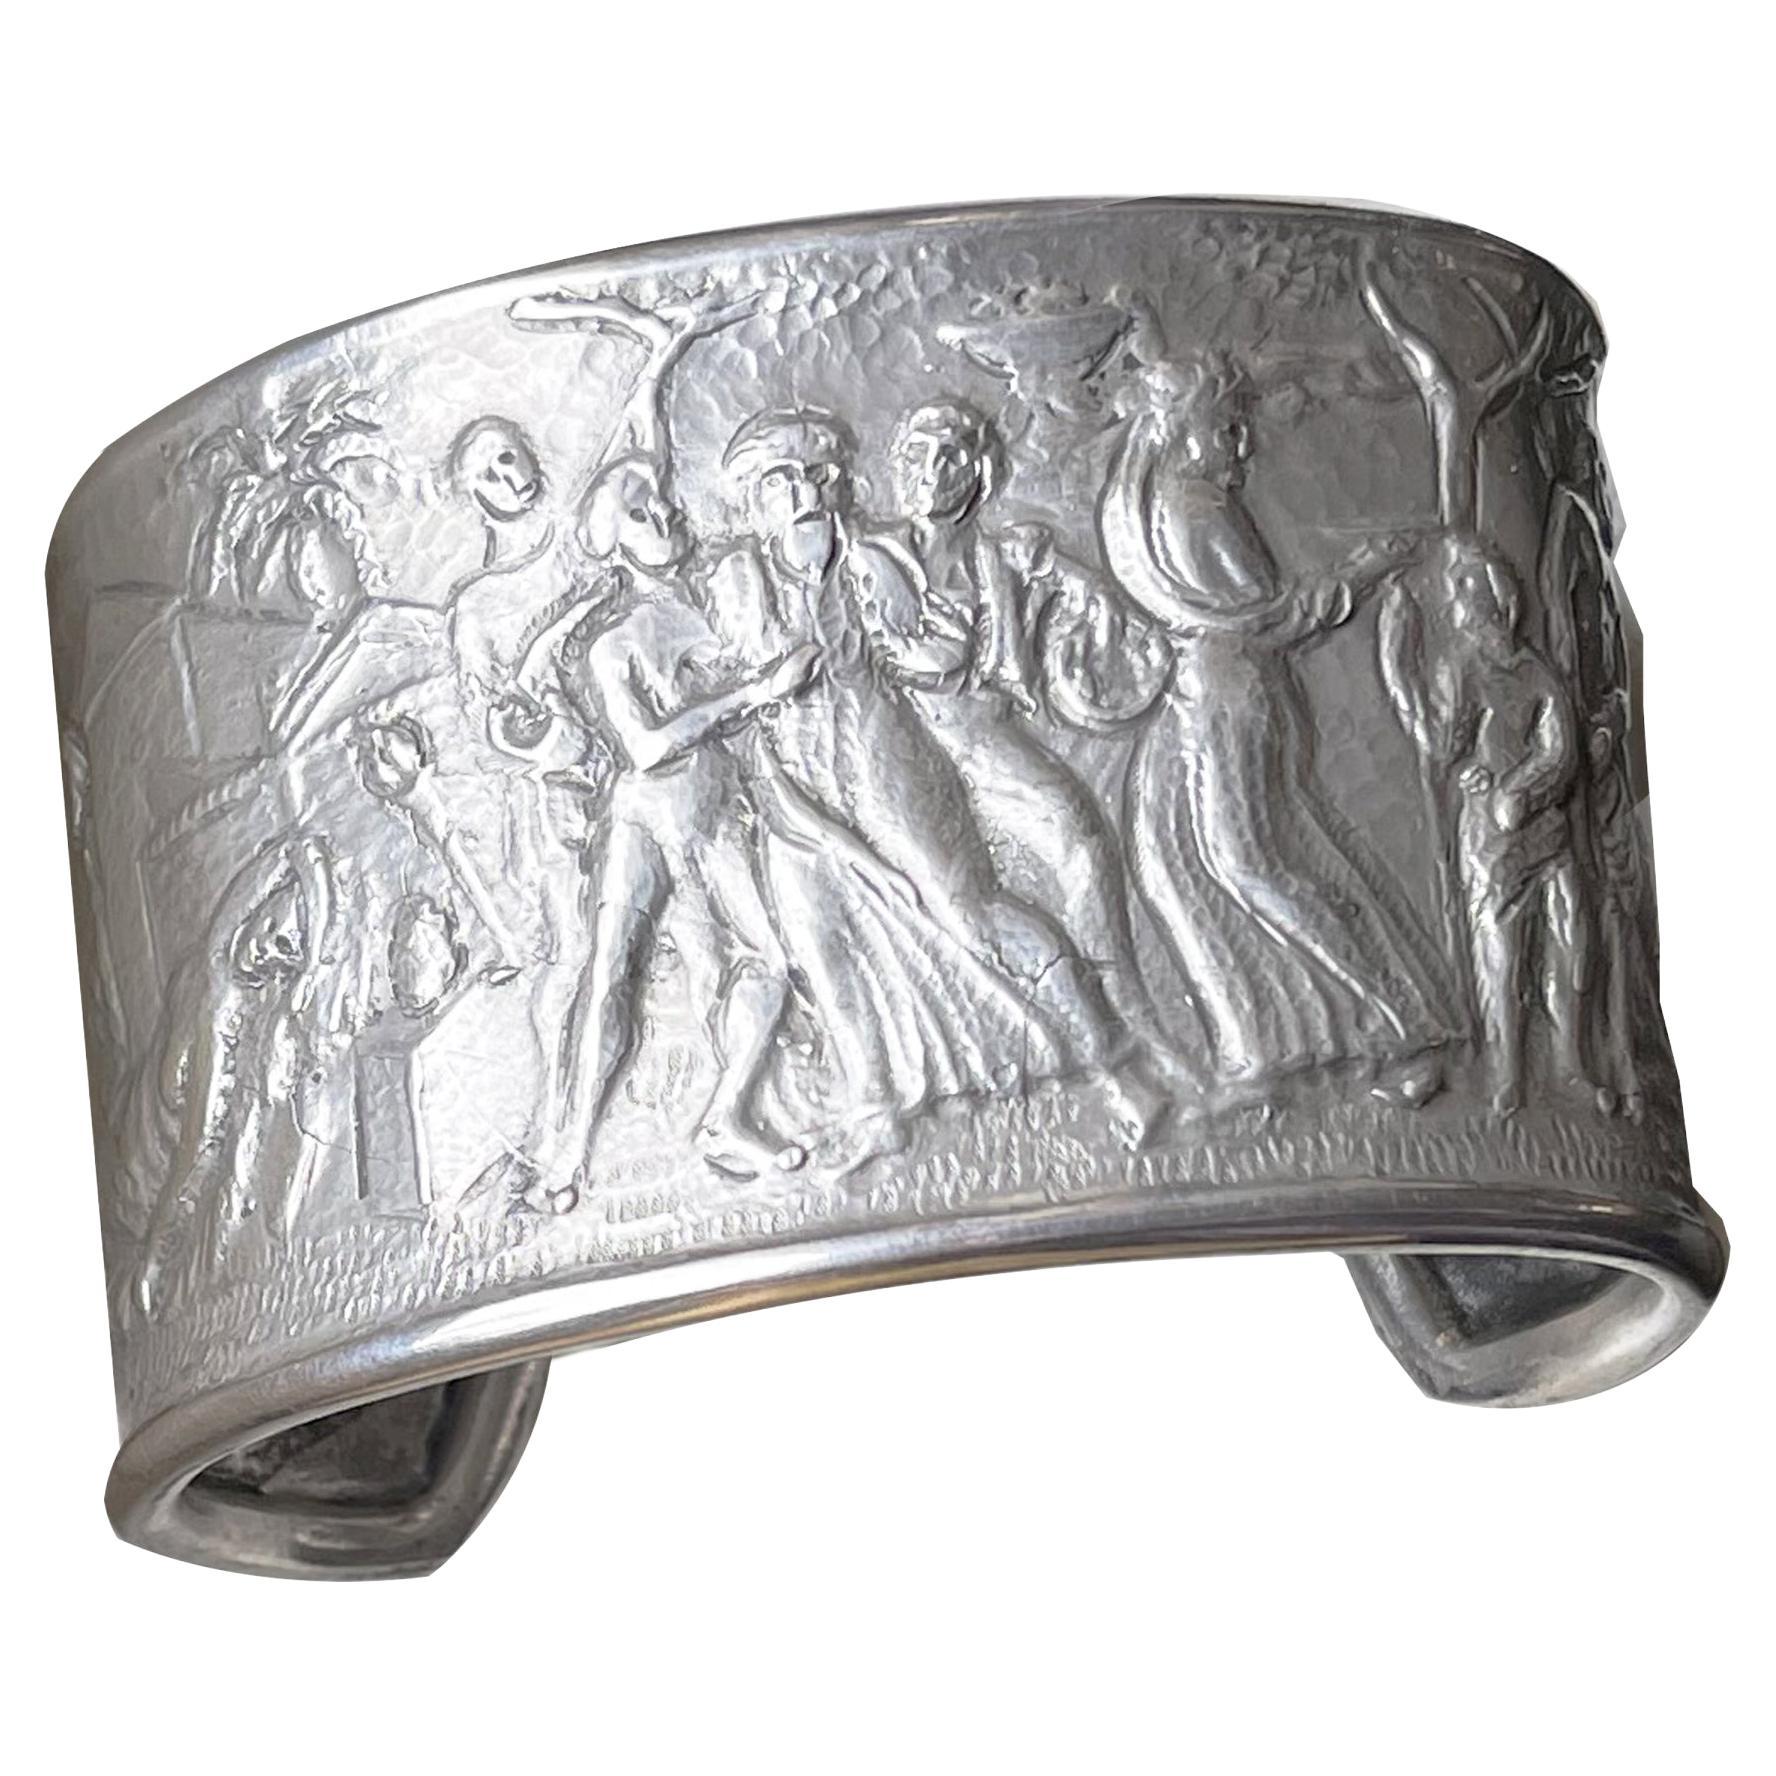 Sterling Silver Bracelet with Bacchanal Scene 'from a Roman Marble Bas-Relief'